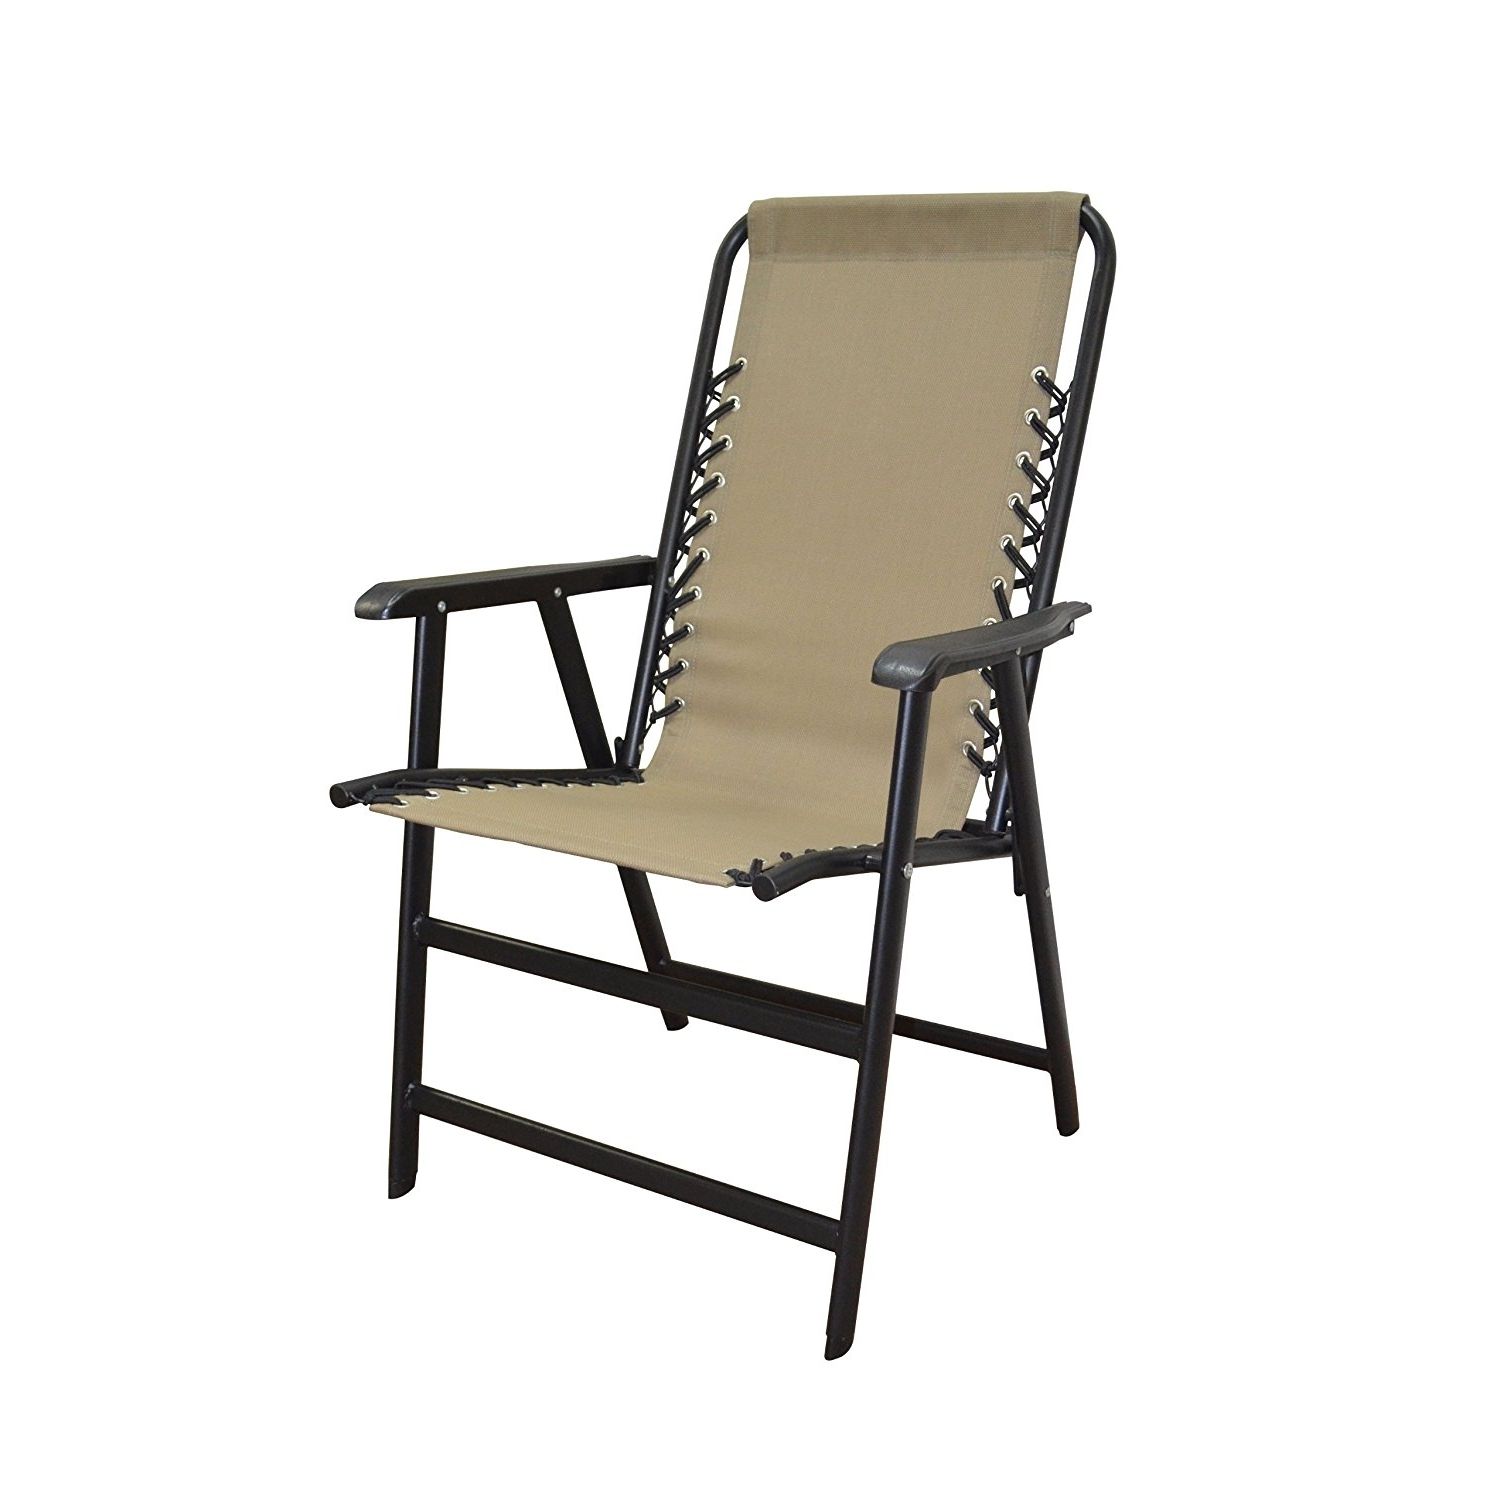 For Big And Heavy People With Most Recent Heavy Duty Outdoor Chaise Lounge Chairs (View 15 of 15)